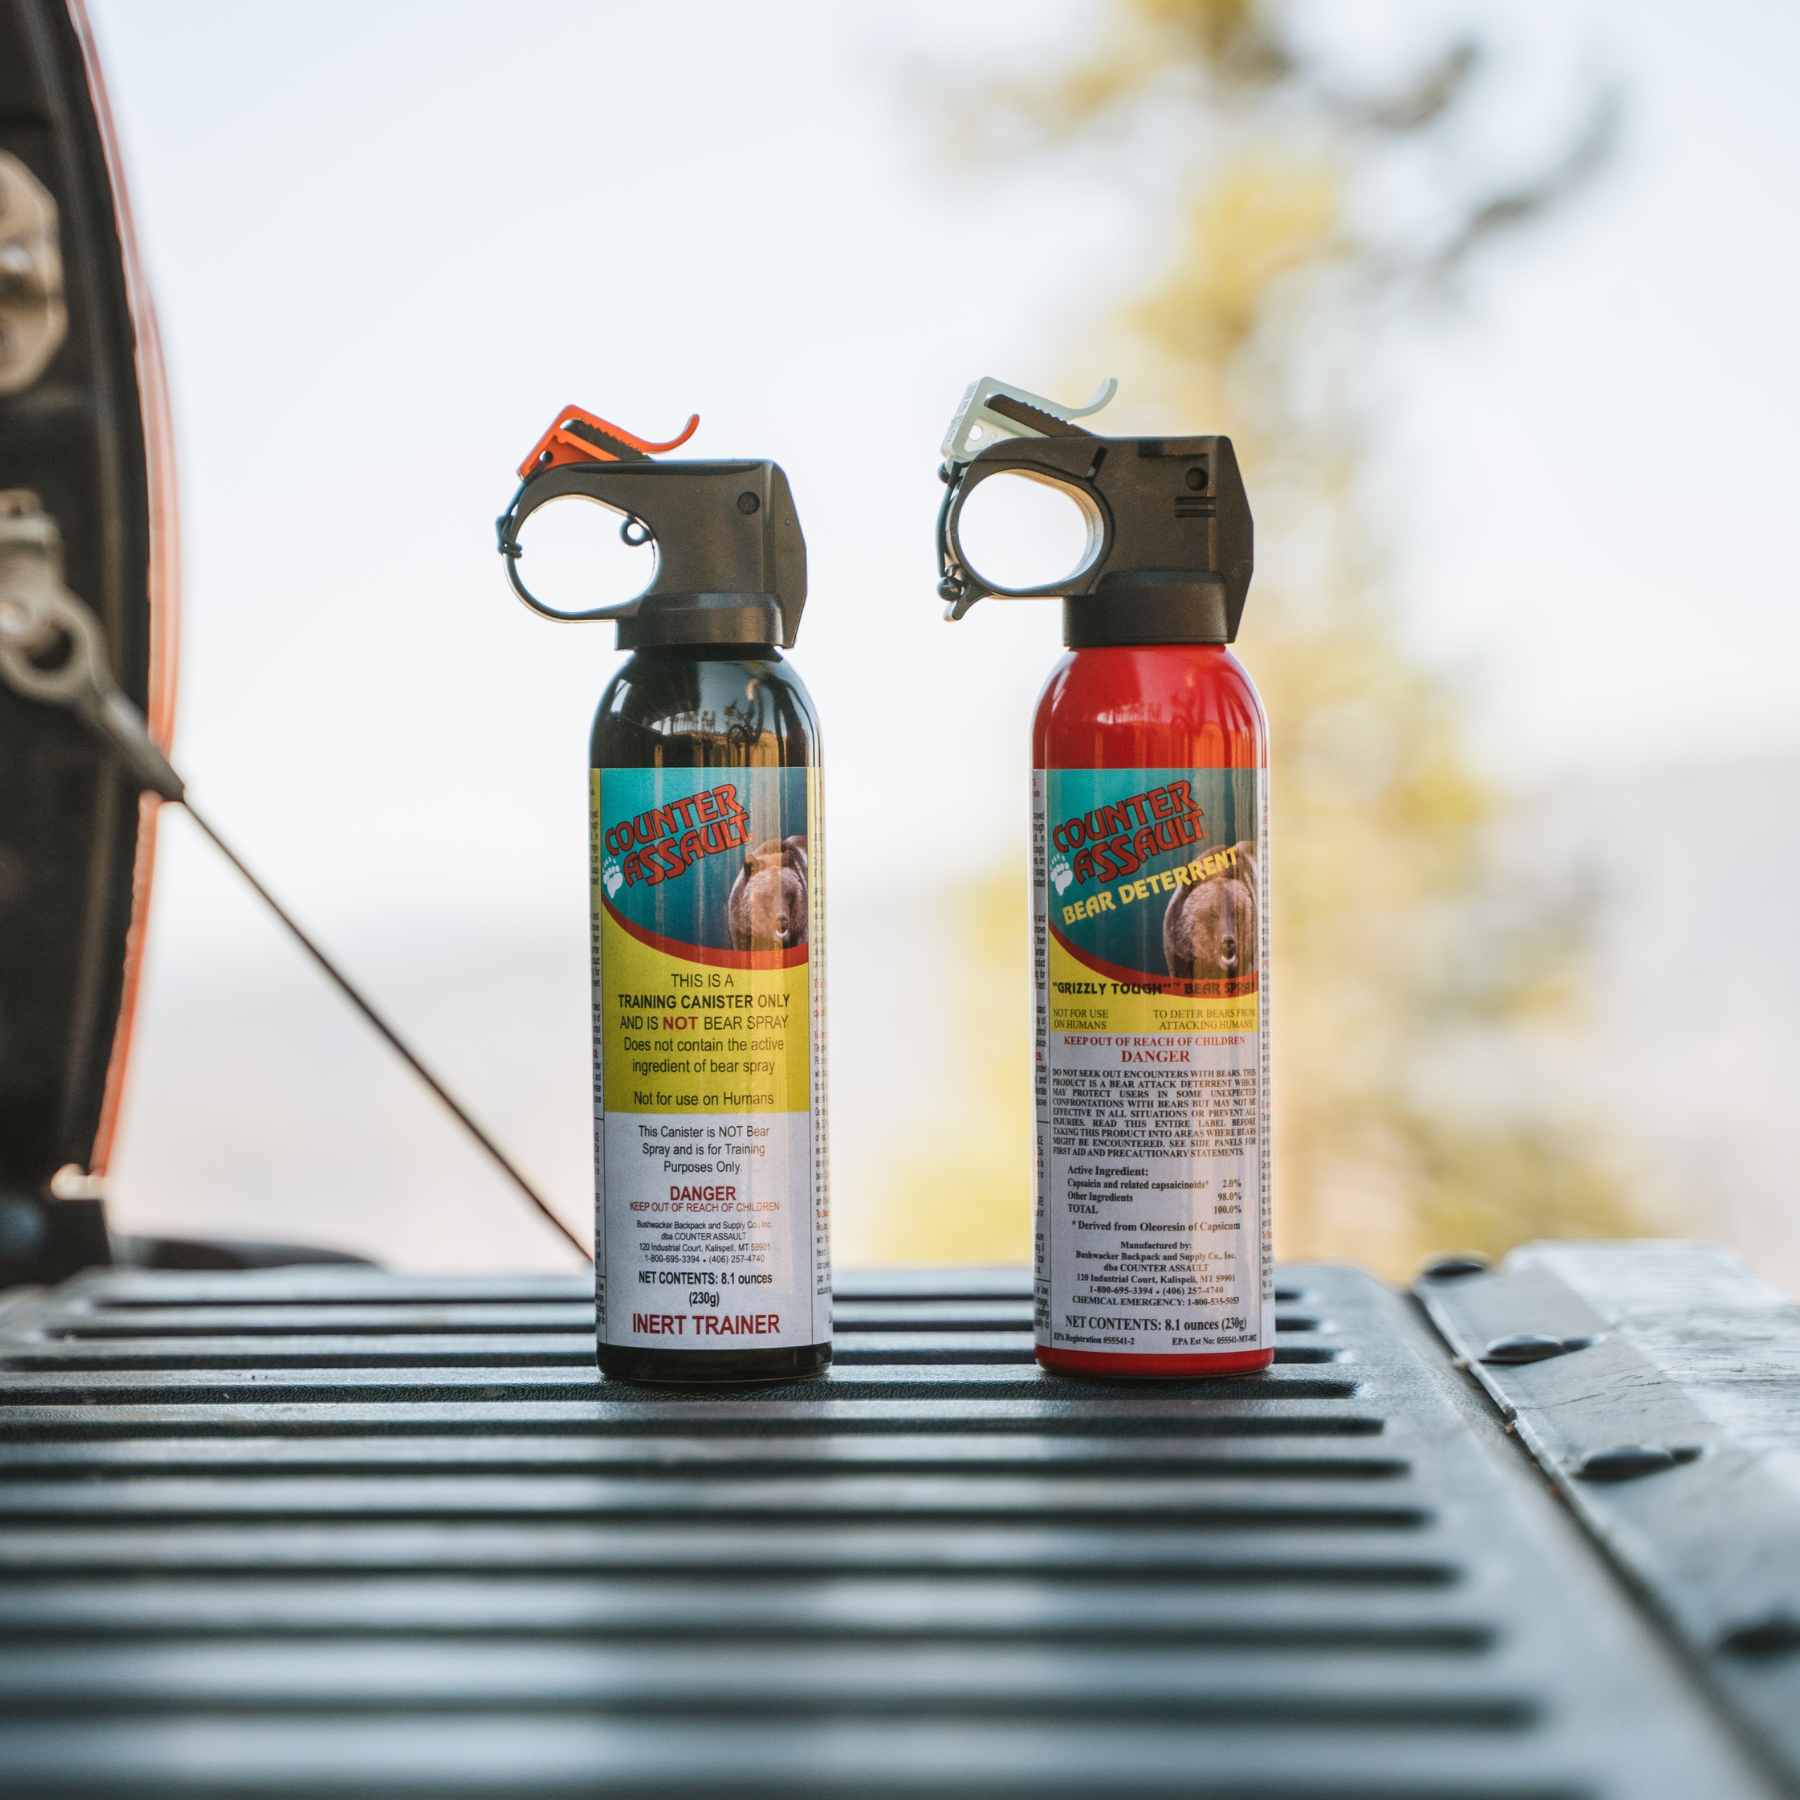 8.1 oz bear spray and training canister on back of truck